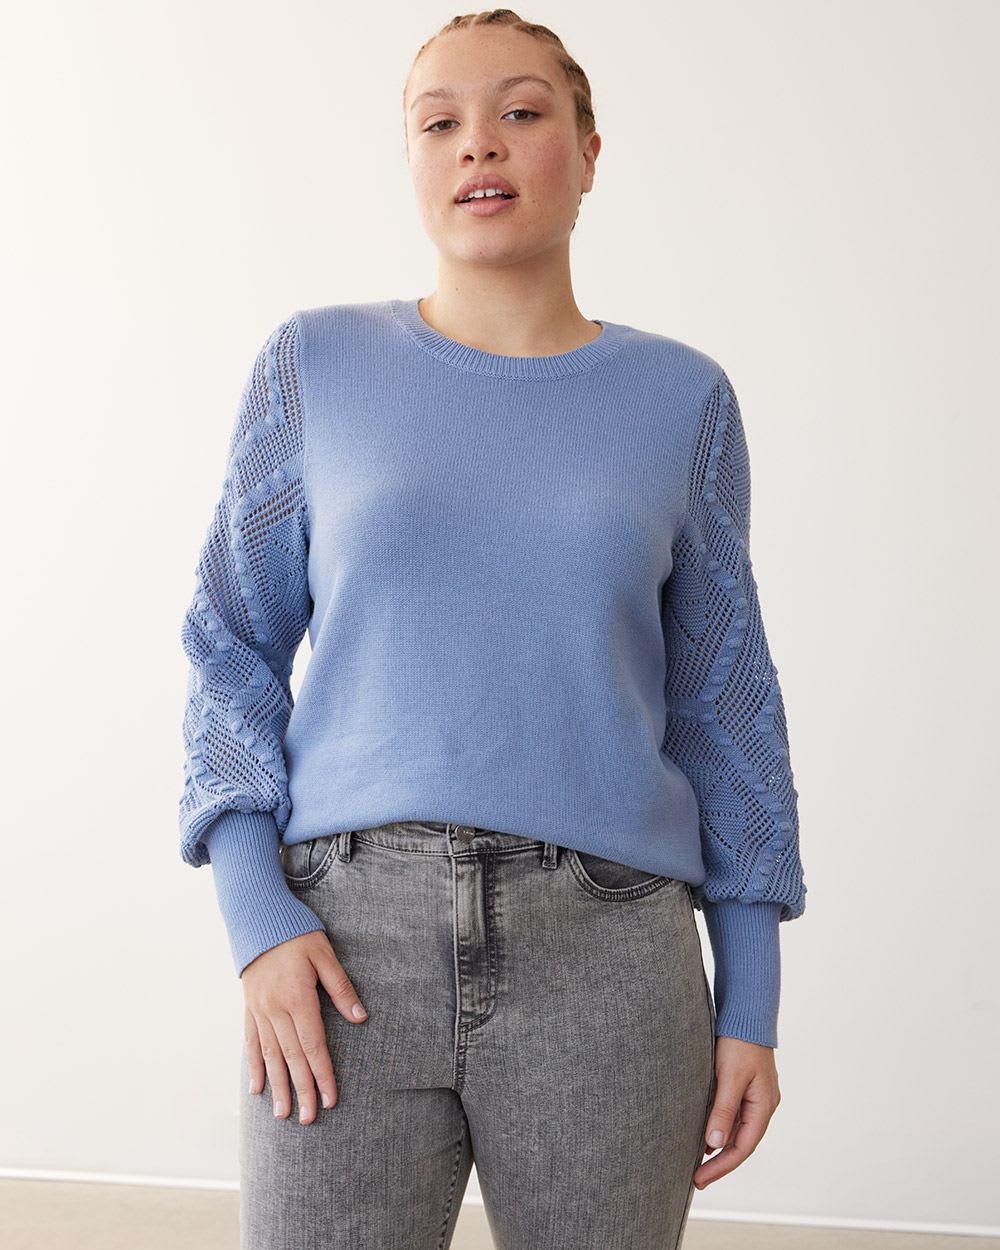 Long-Sleeve Crew-Neck Sweater with Popcorn Stitches